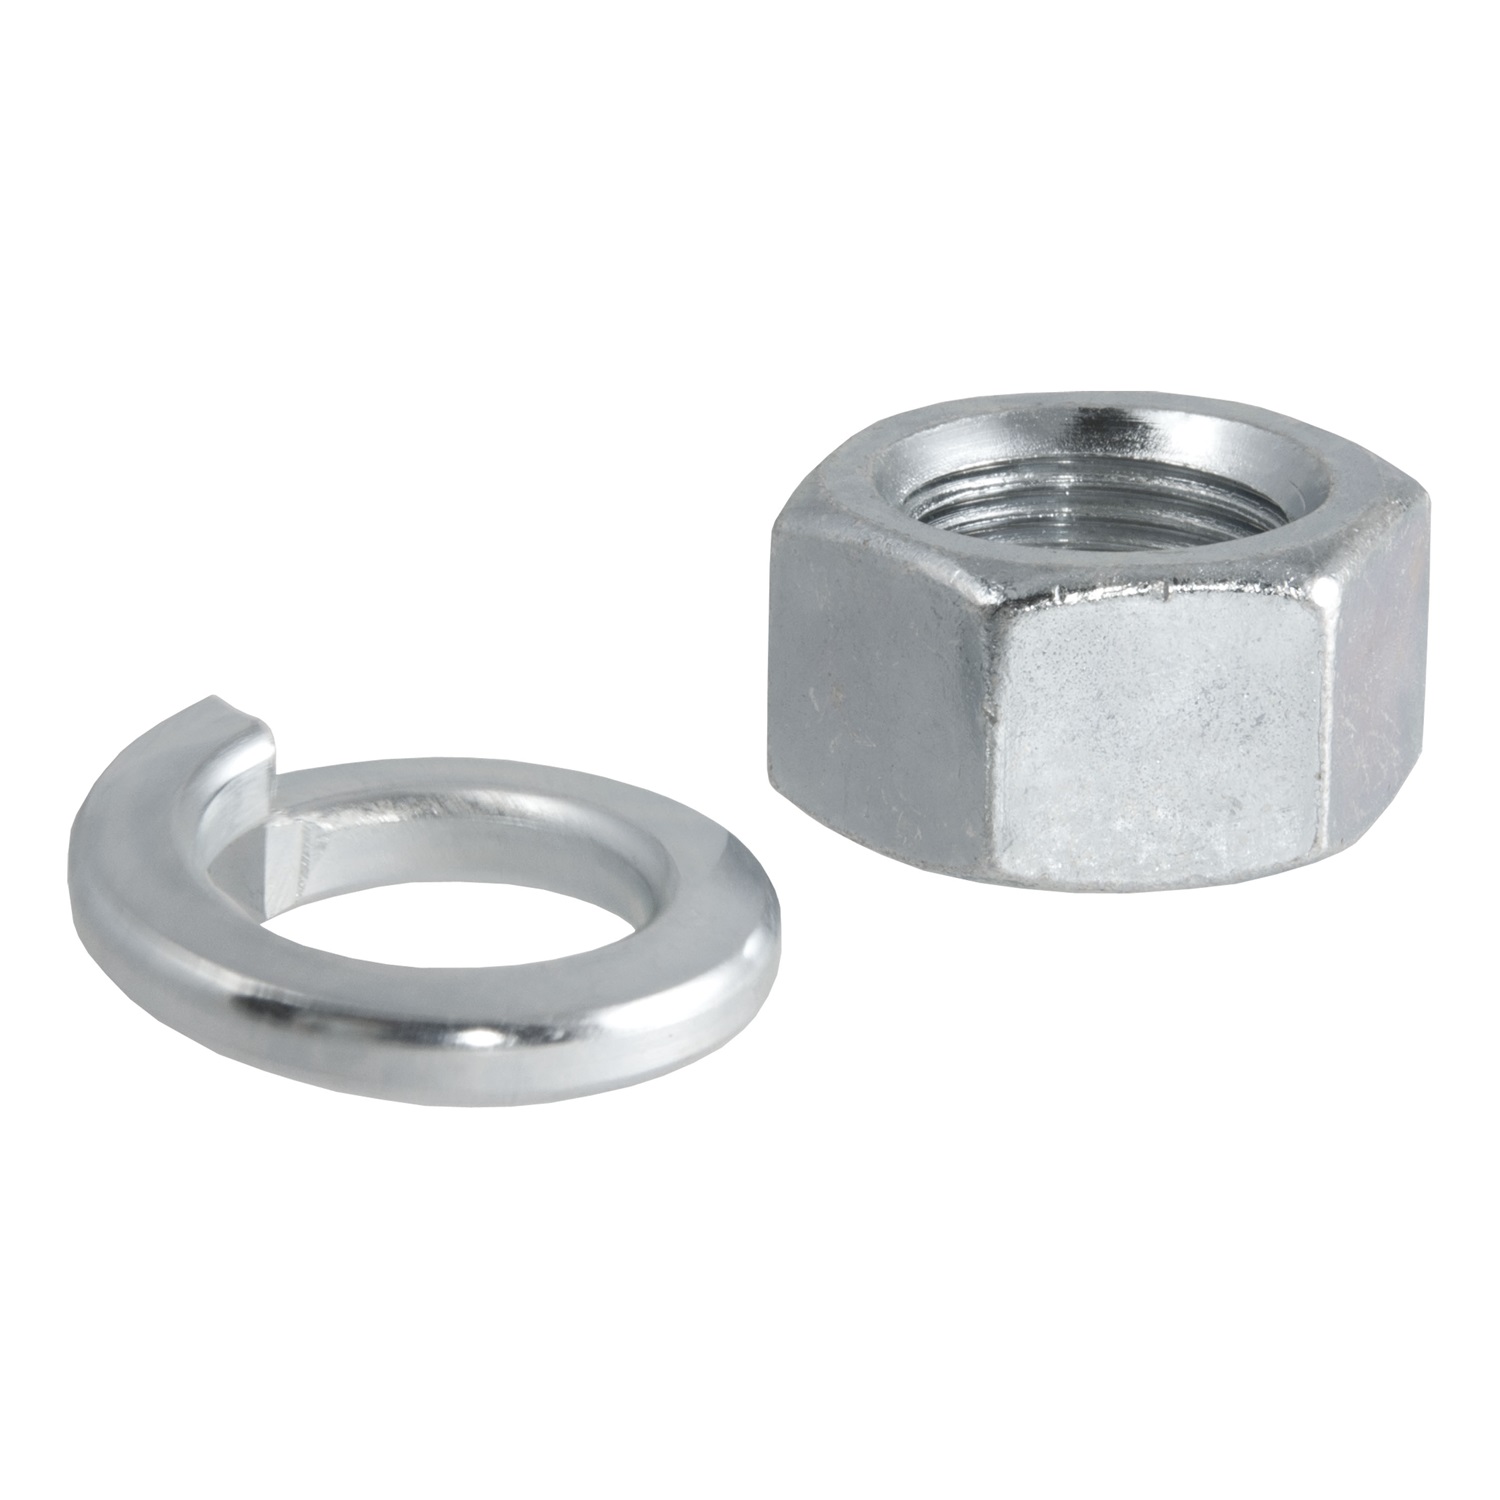 CURT Manufacturing CURT Manufacturing 40103 Nuts And Washers  Fits